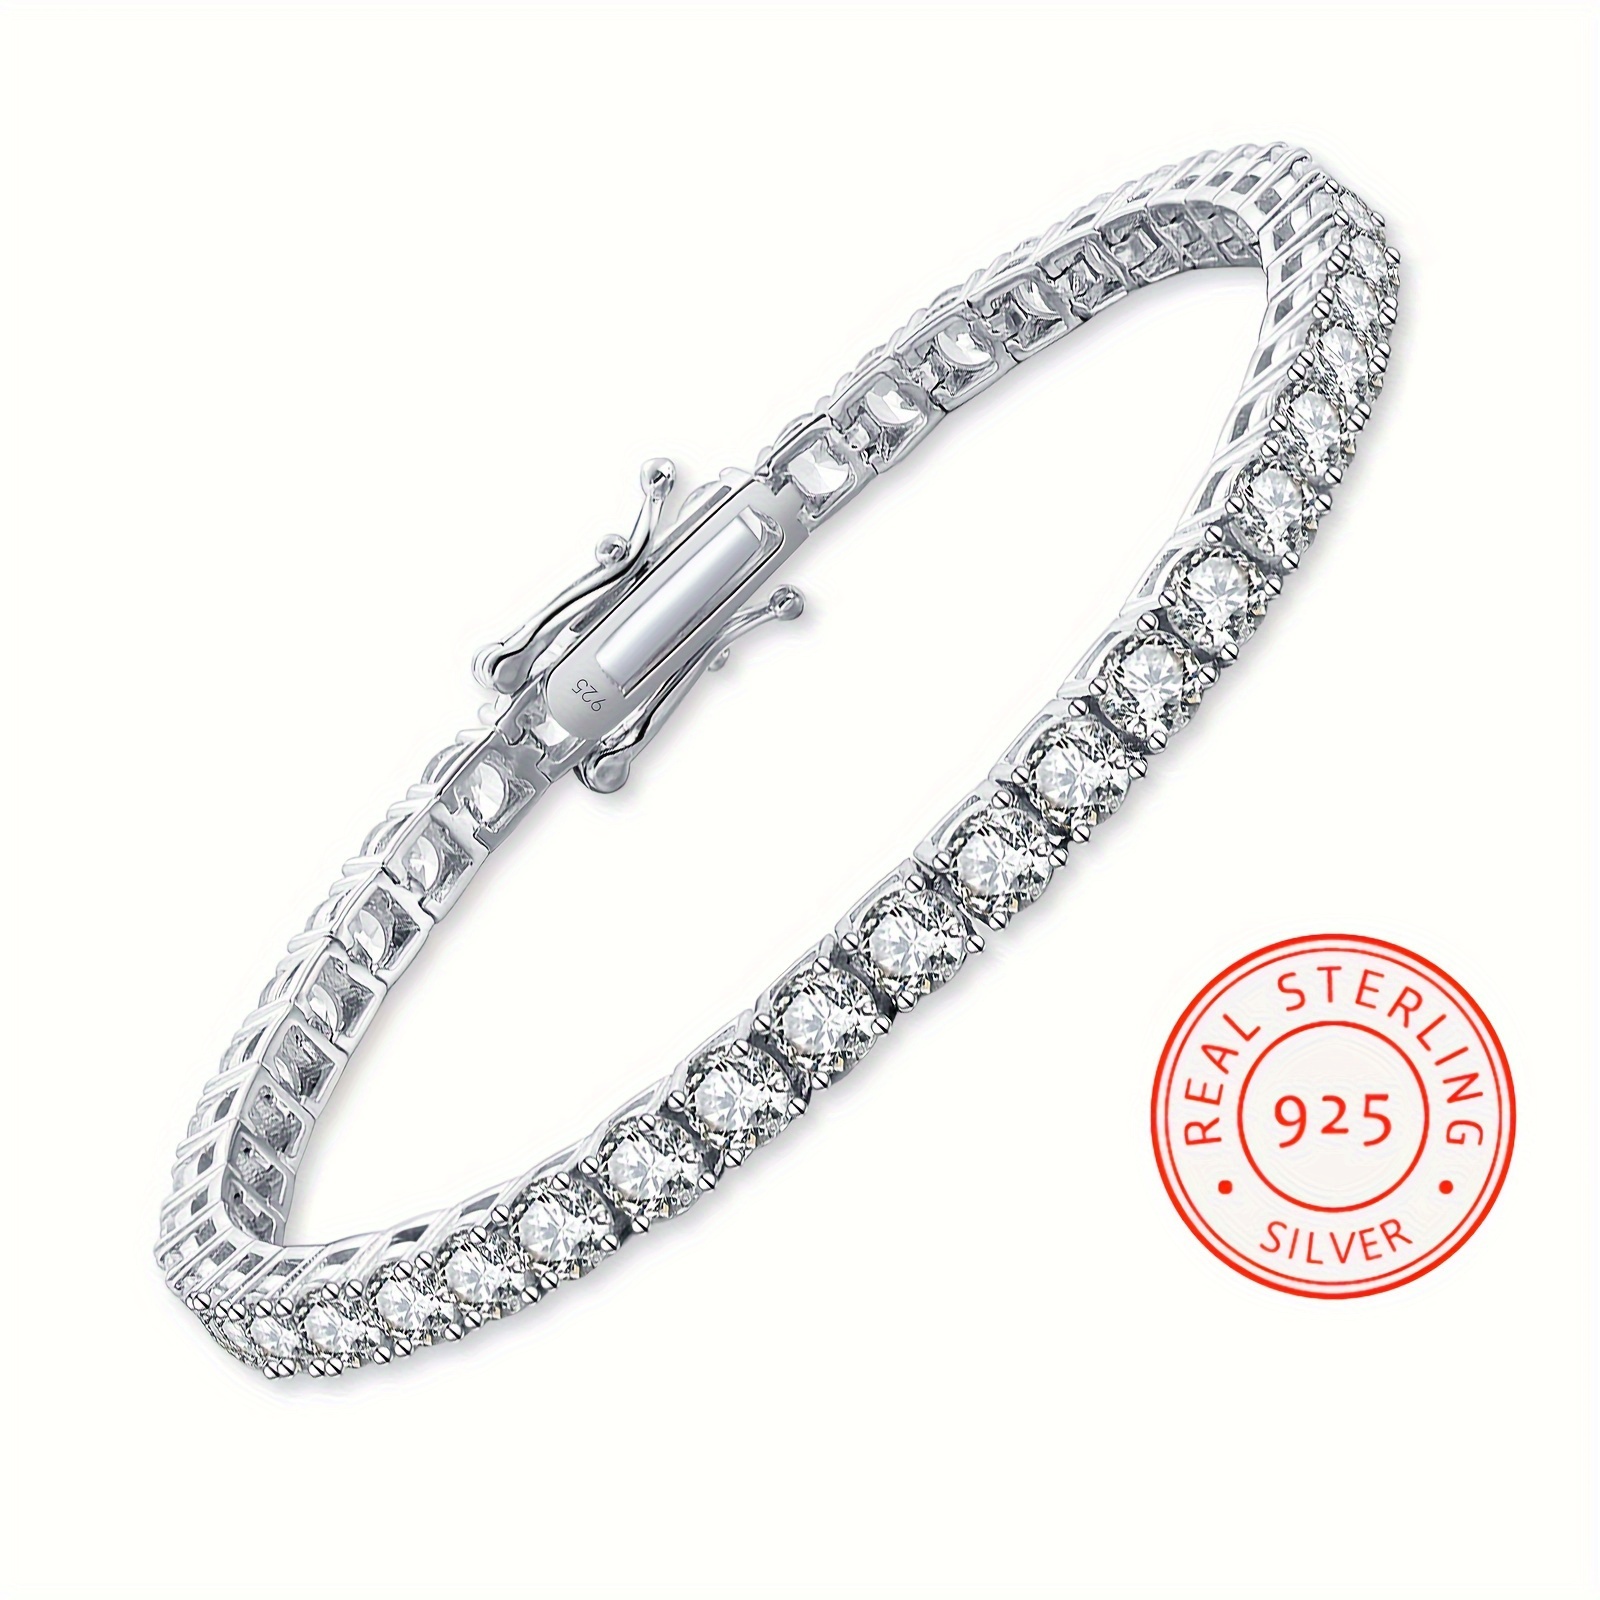 

Luxurious Tennis Chain Bracelet With 14g Of 925 Silver, Fully Set With 4mm Aaaa Artificial Cubic Zirconia For An Ultra-sparkling Effect.